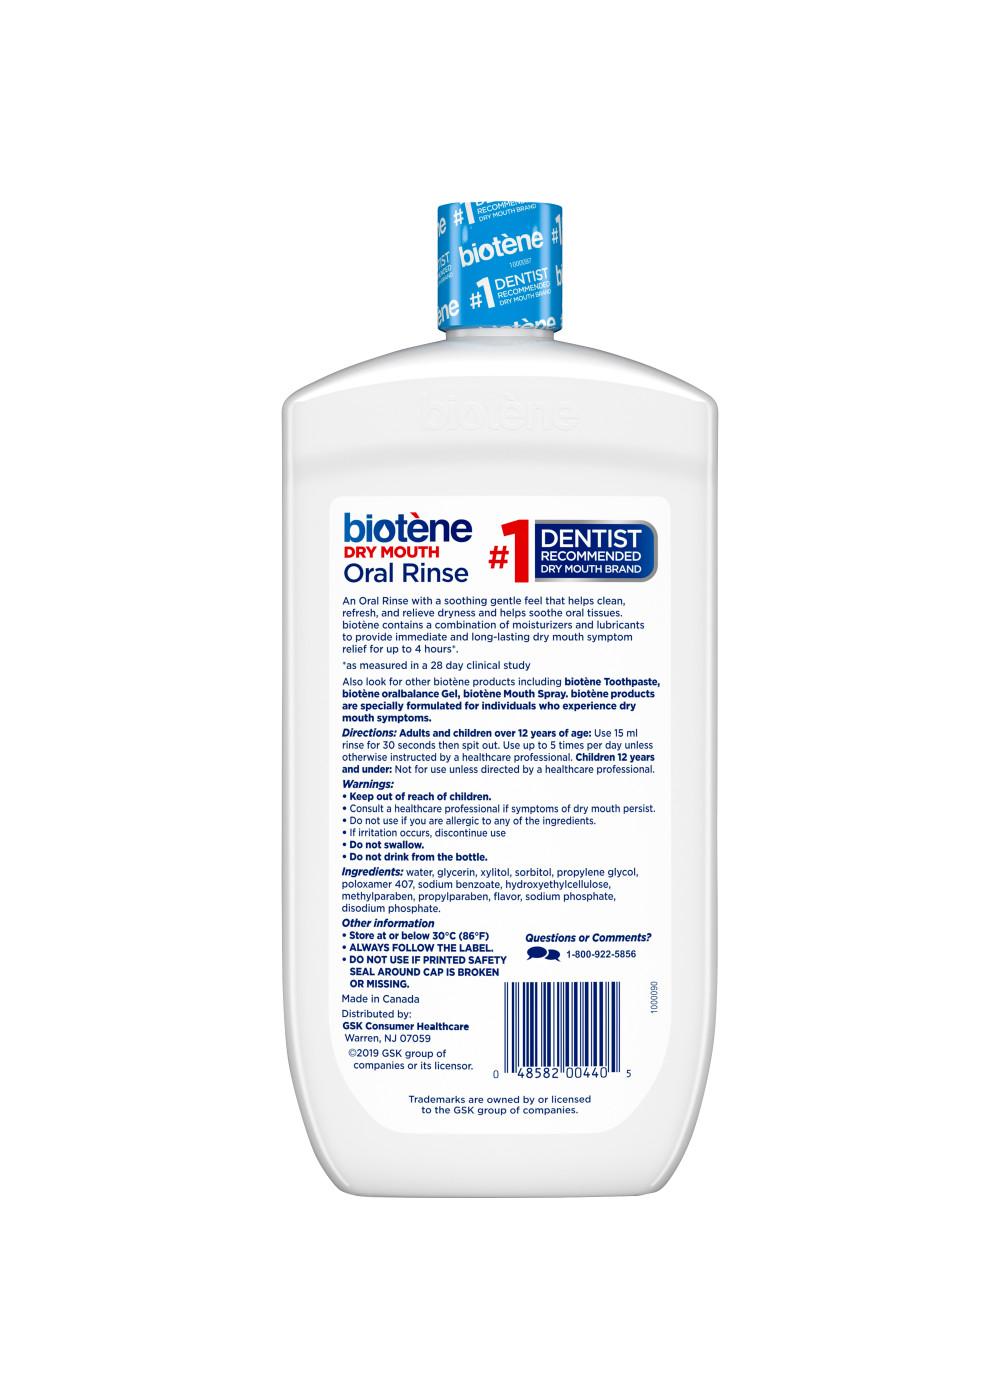 Biotene Dry Mouth Oral Rinse - Fresh Mint; image 8 of 10